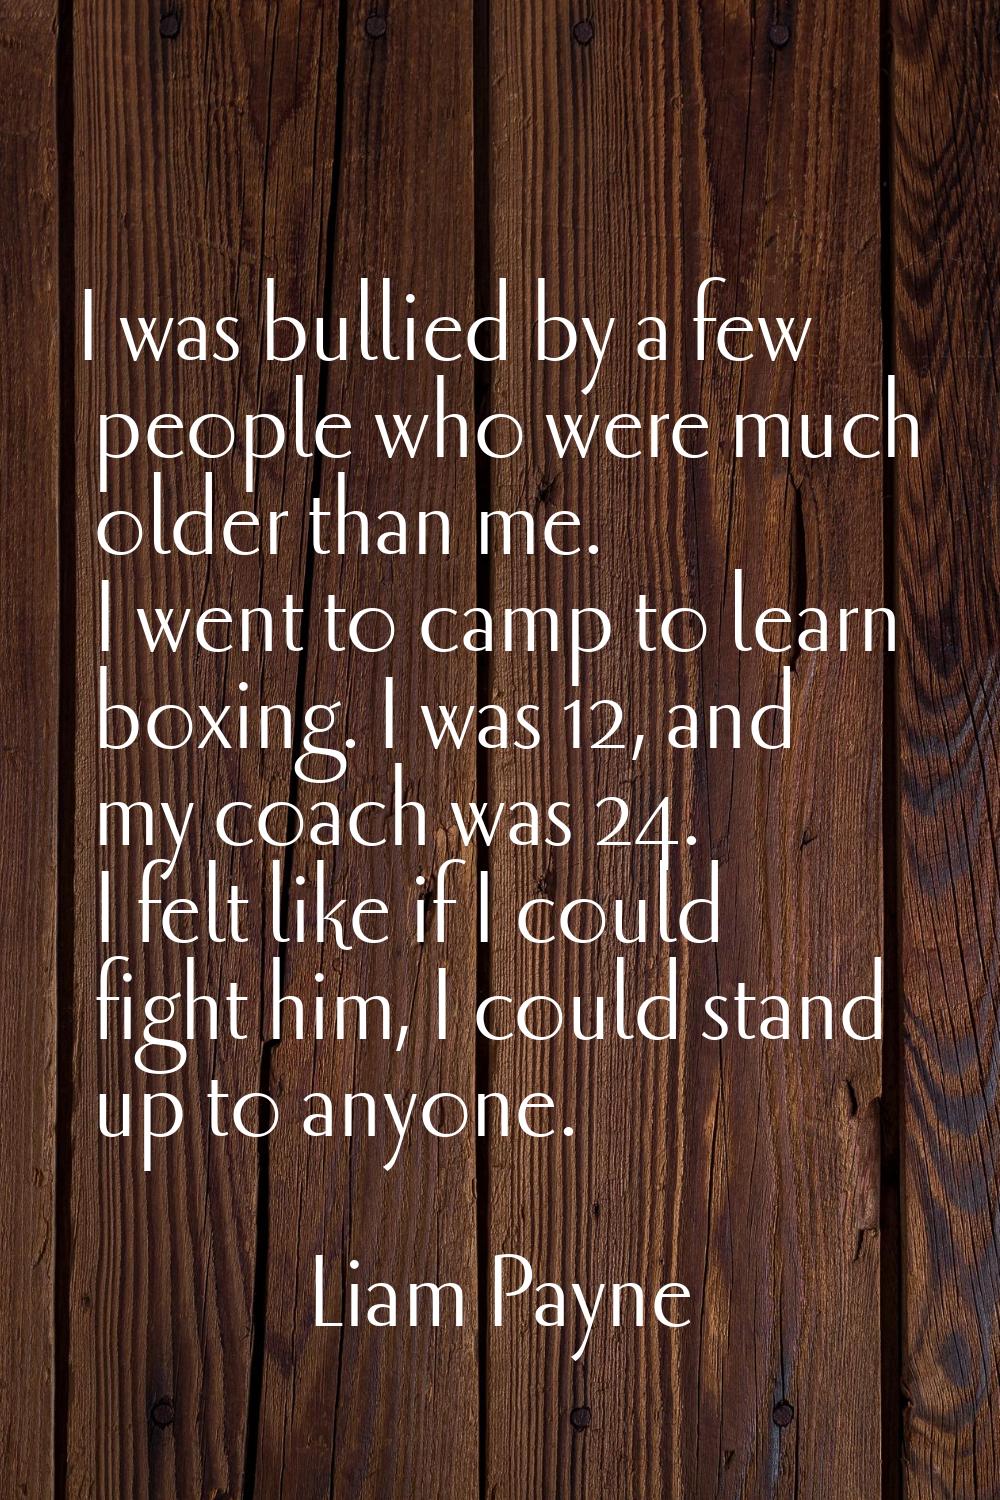 I was bullied by a few people who were much older than me. I went to camp to learn boxing. I was 12